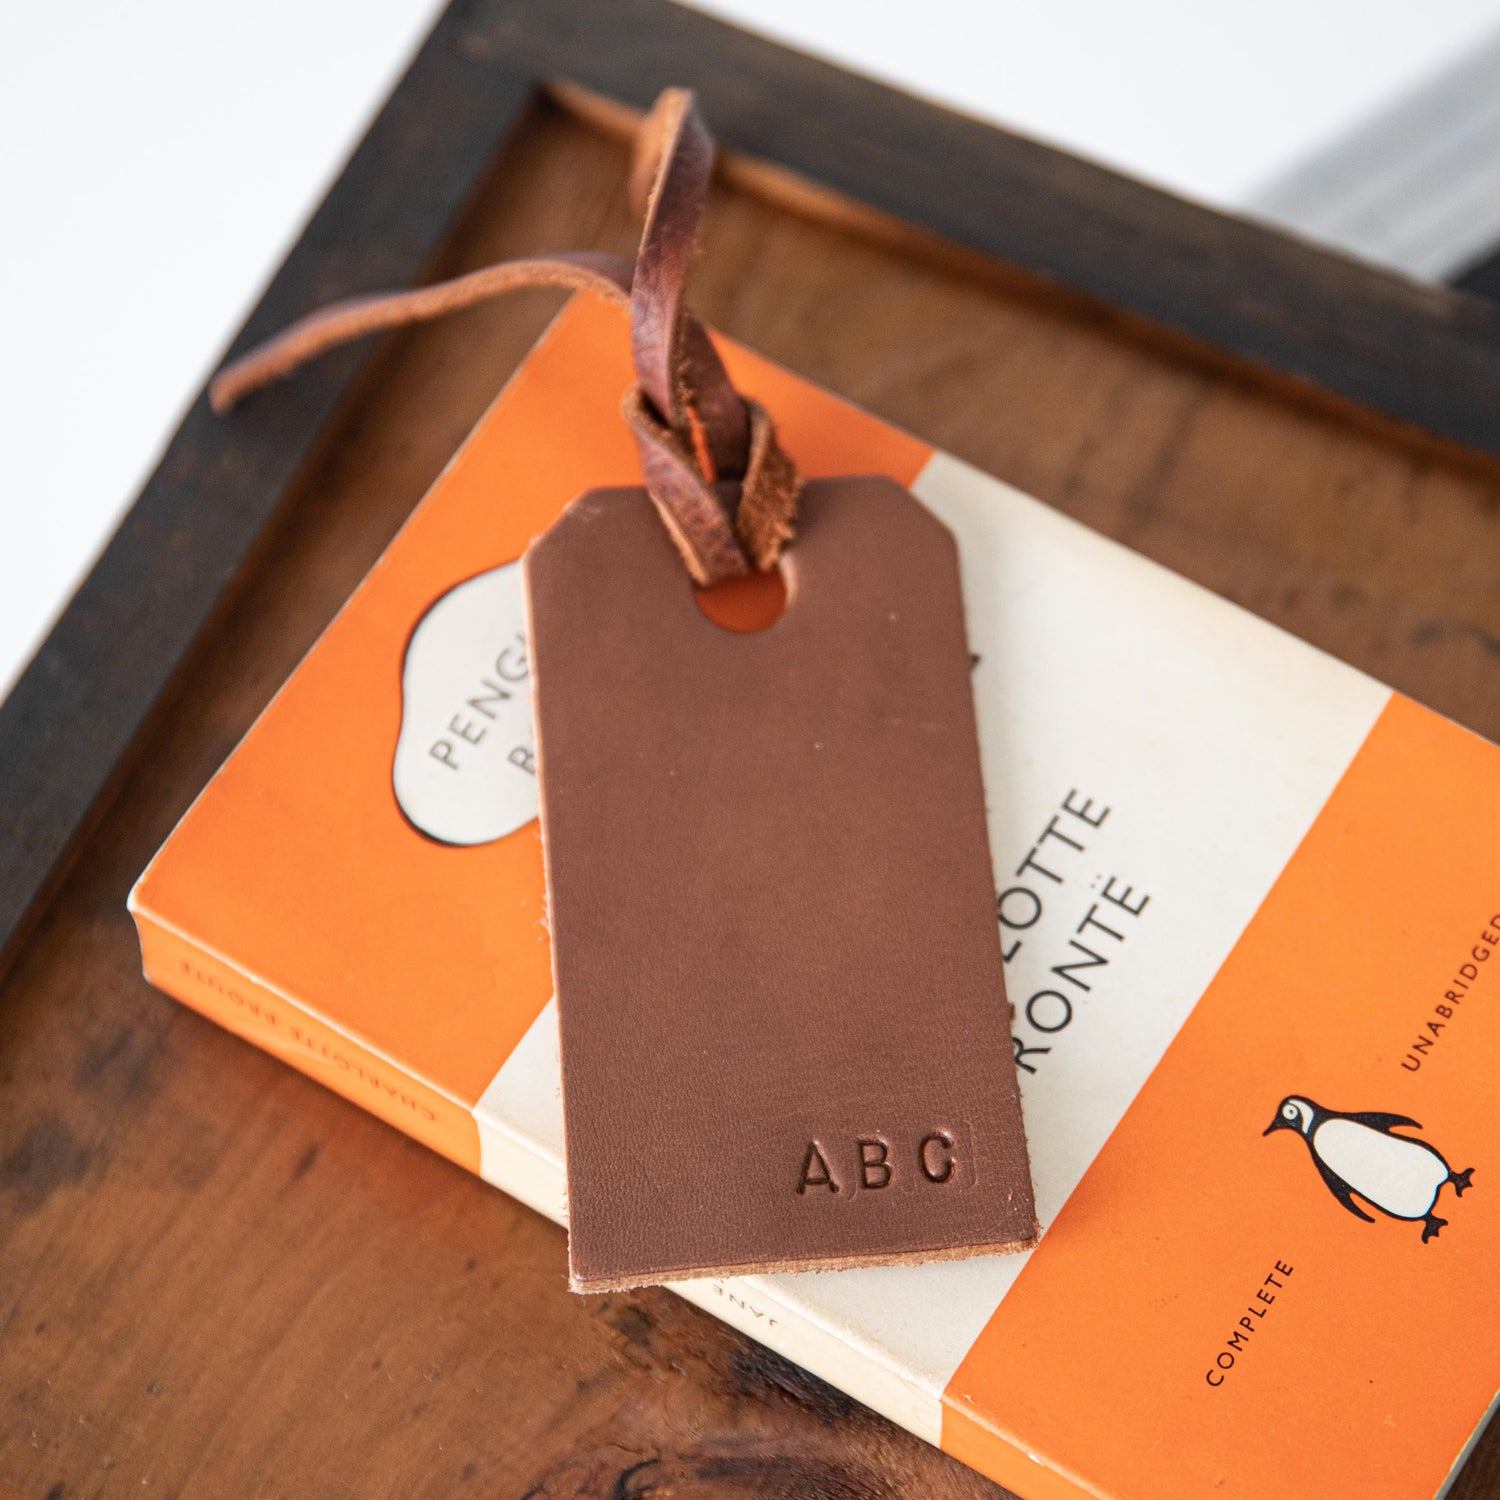 Luggage Tags: Brown Leather Tag  custom luggage tag by KMM & Co.